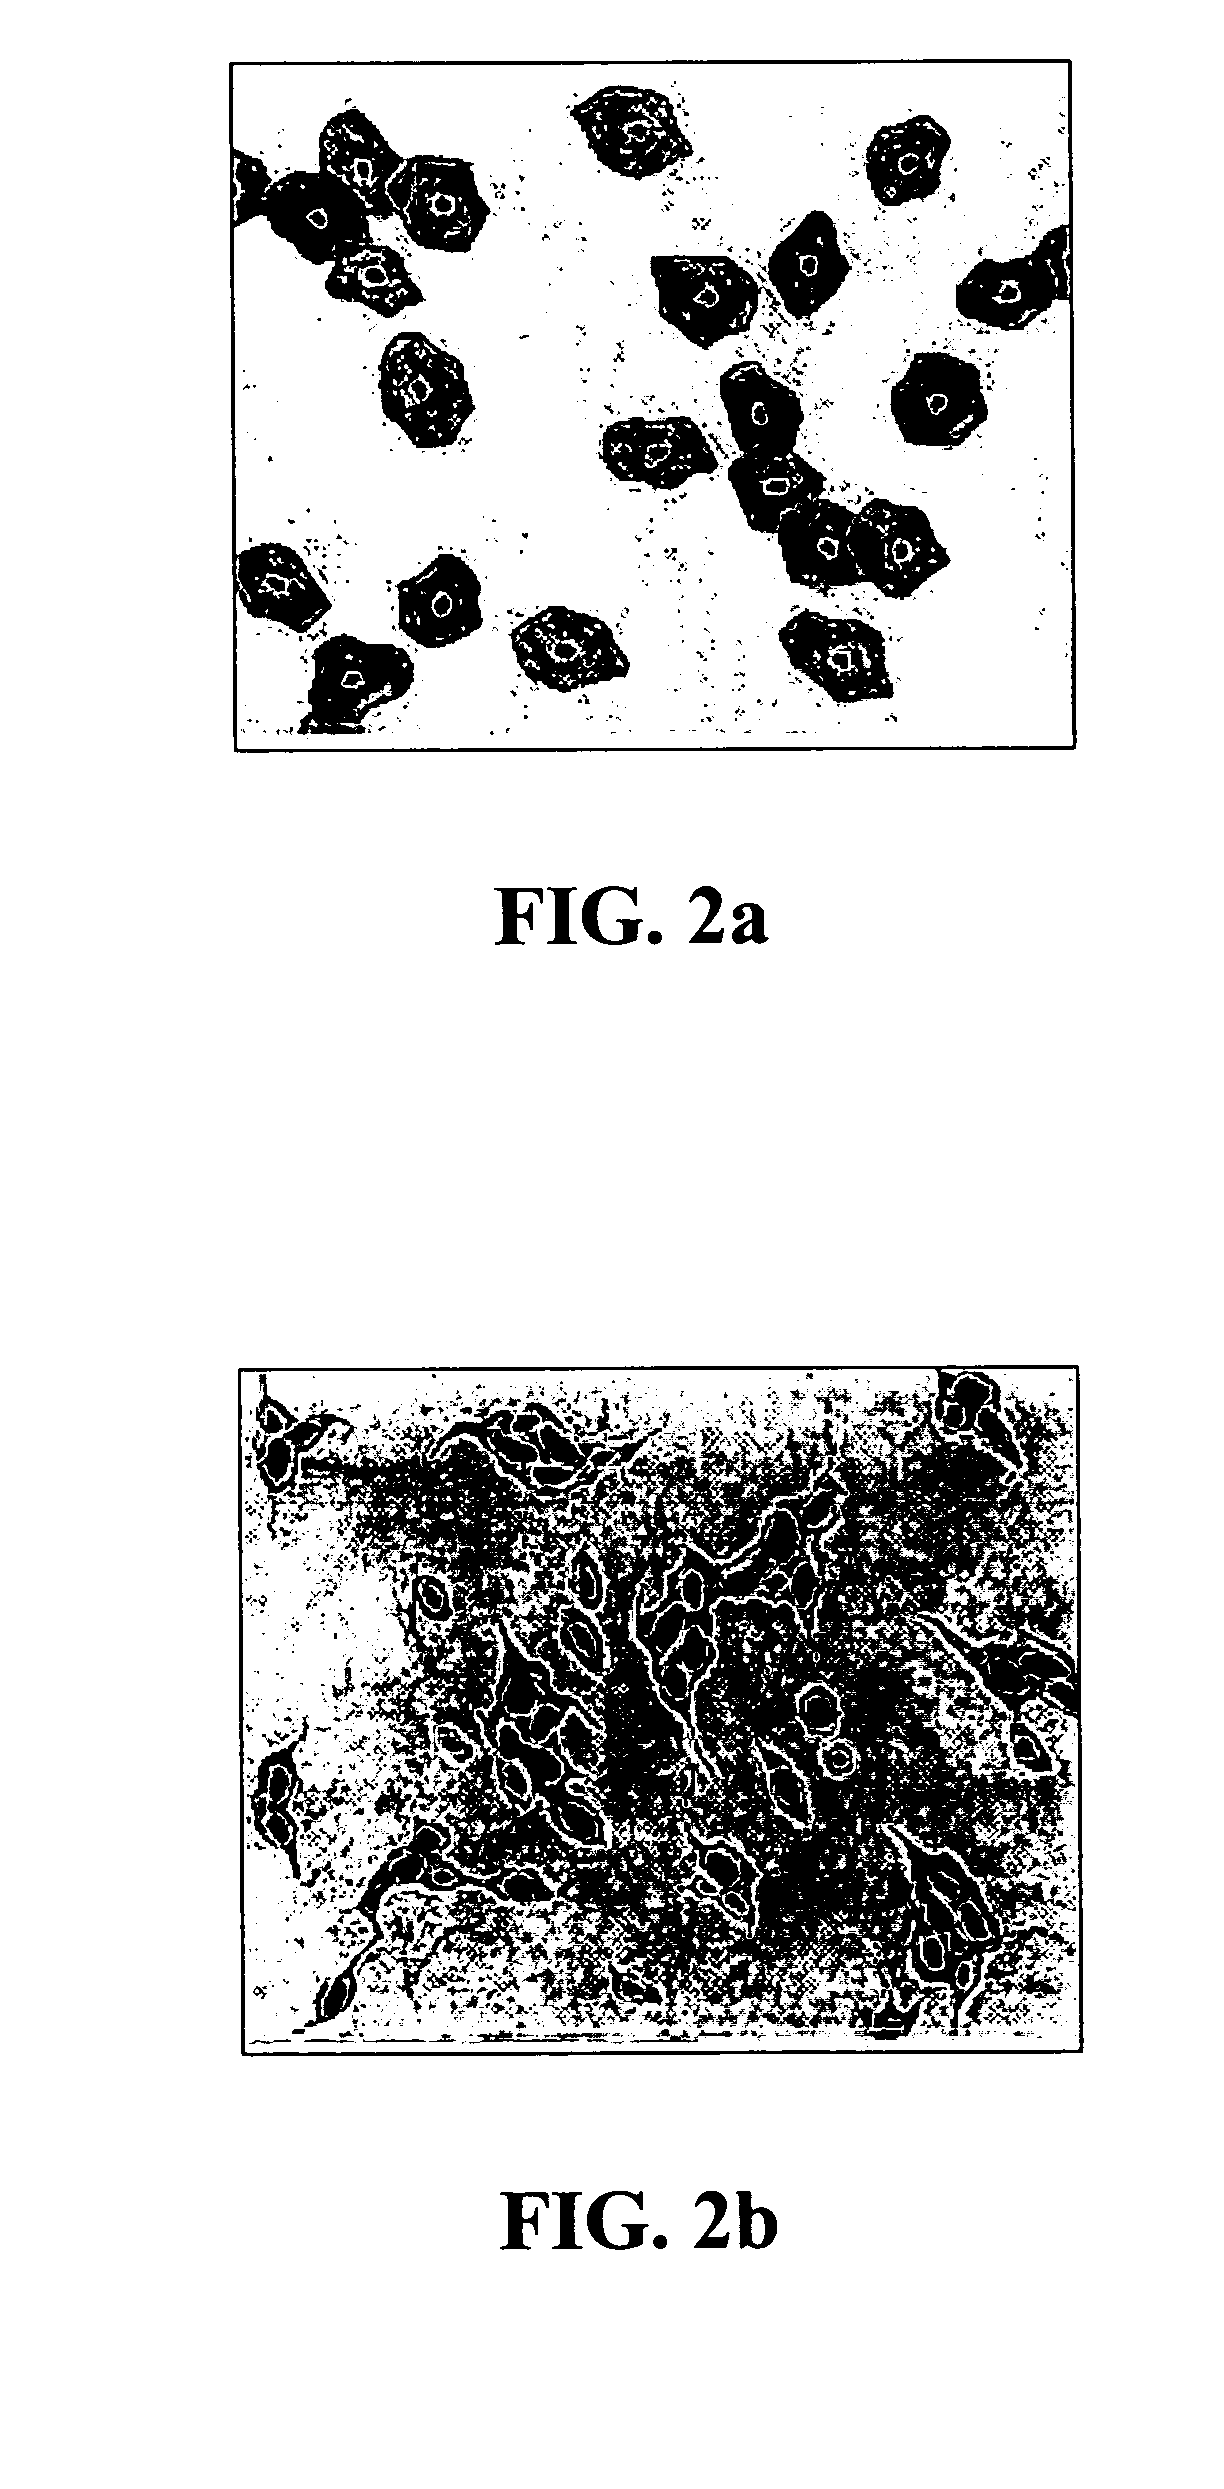 Method and apparatus for automated analysis of biological specimen